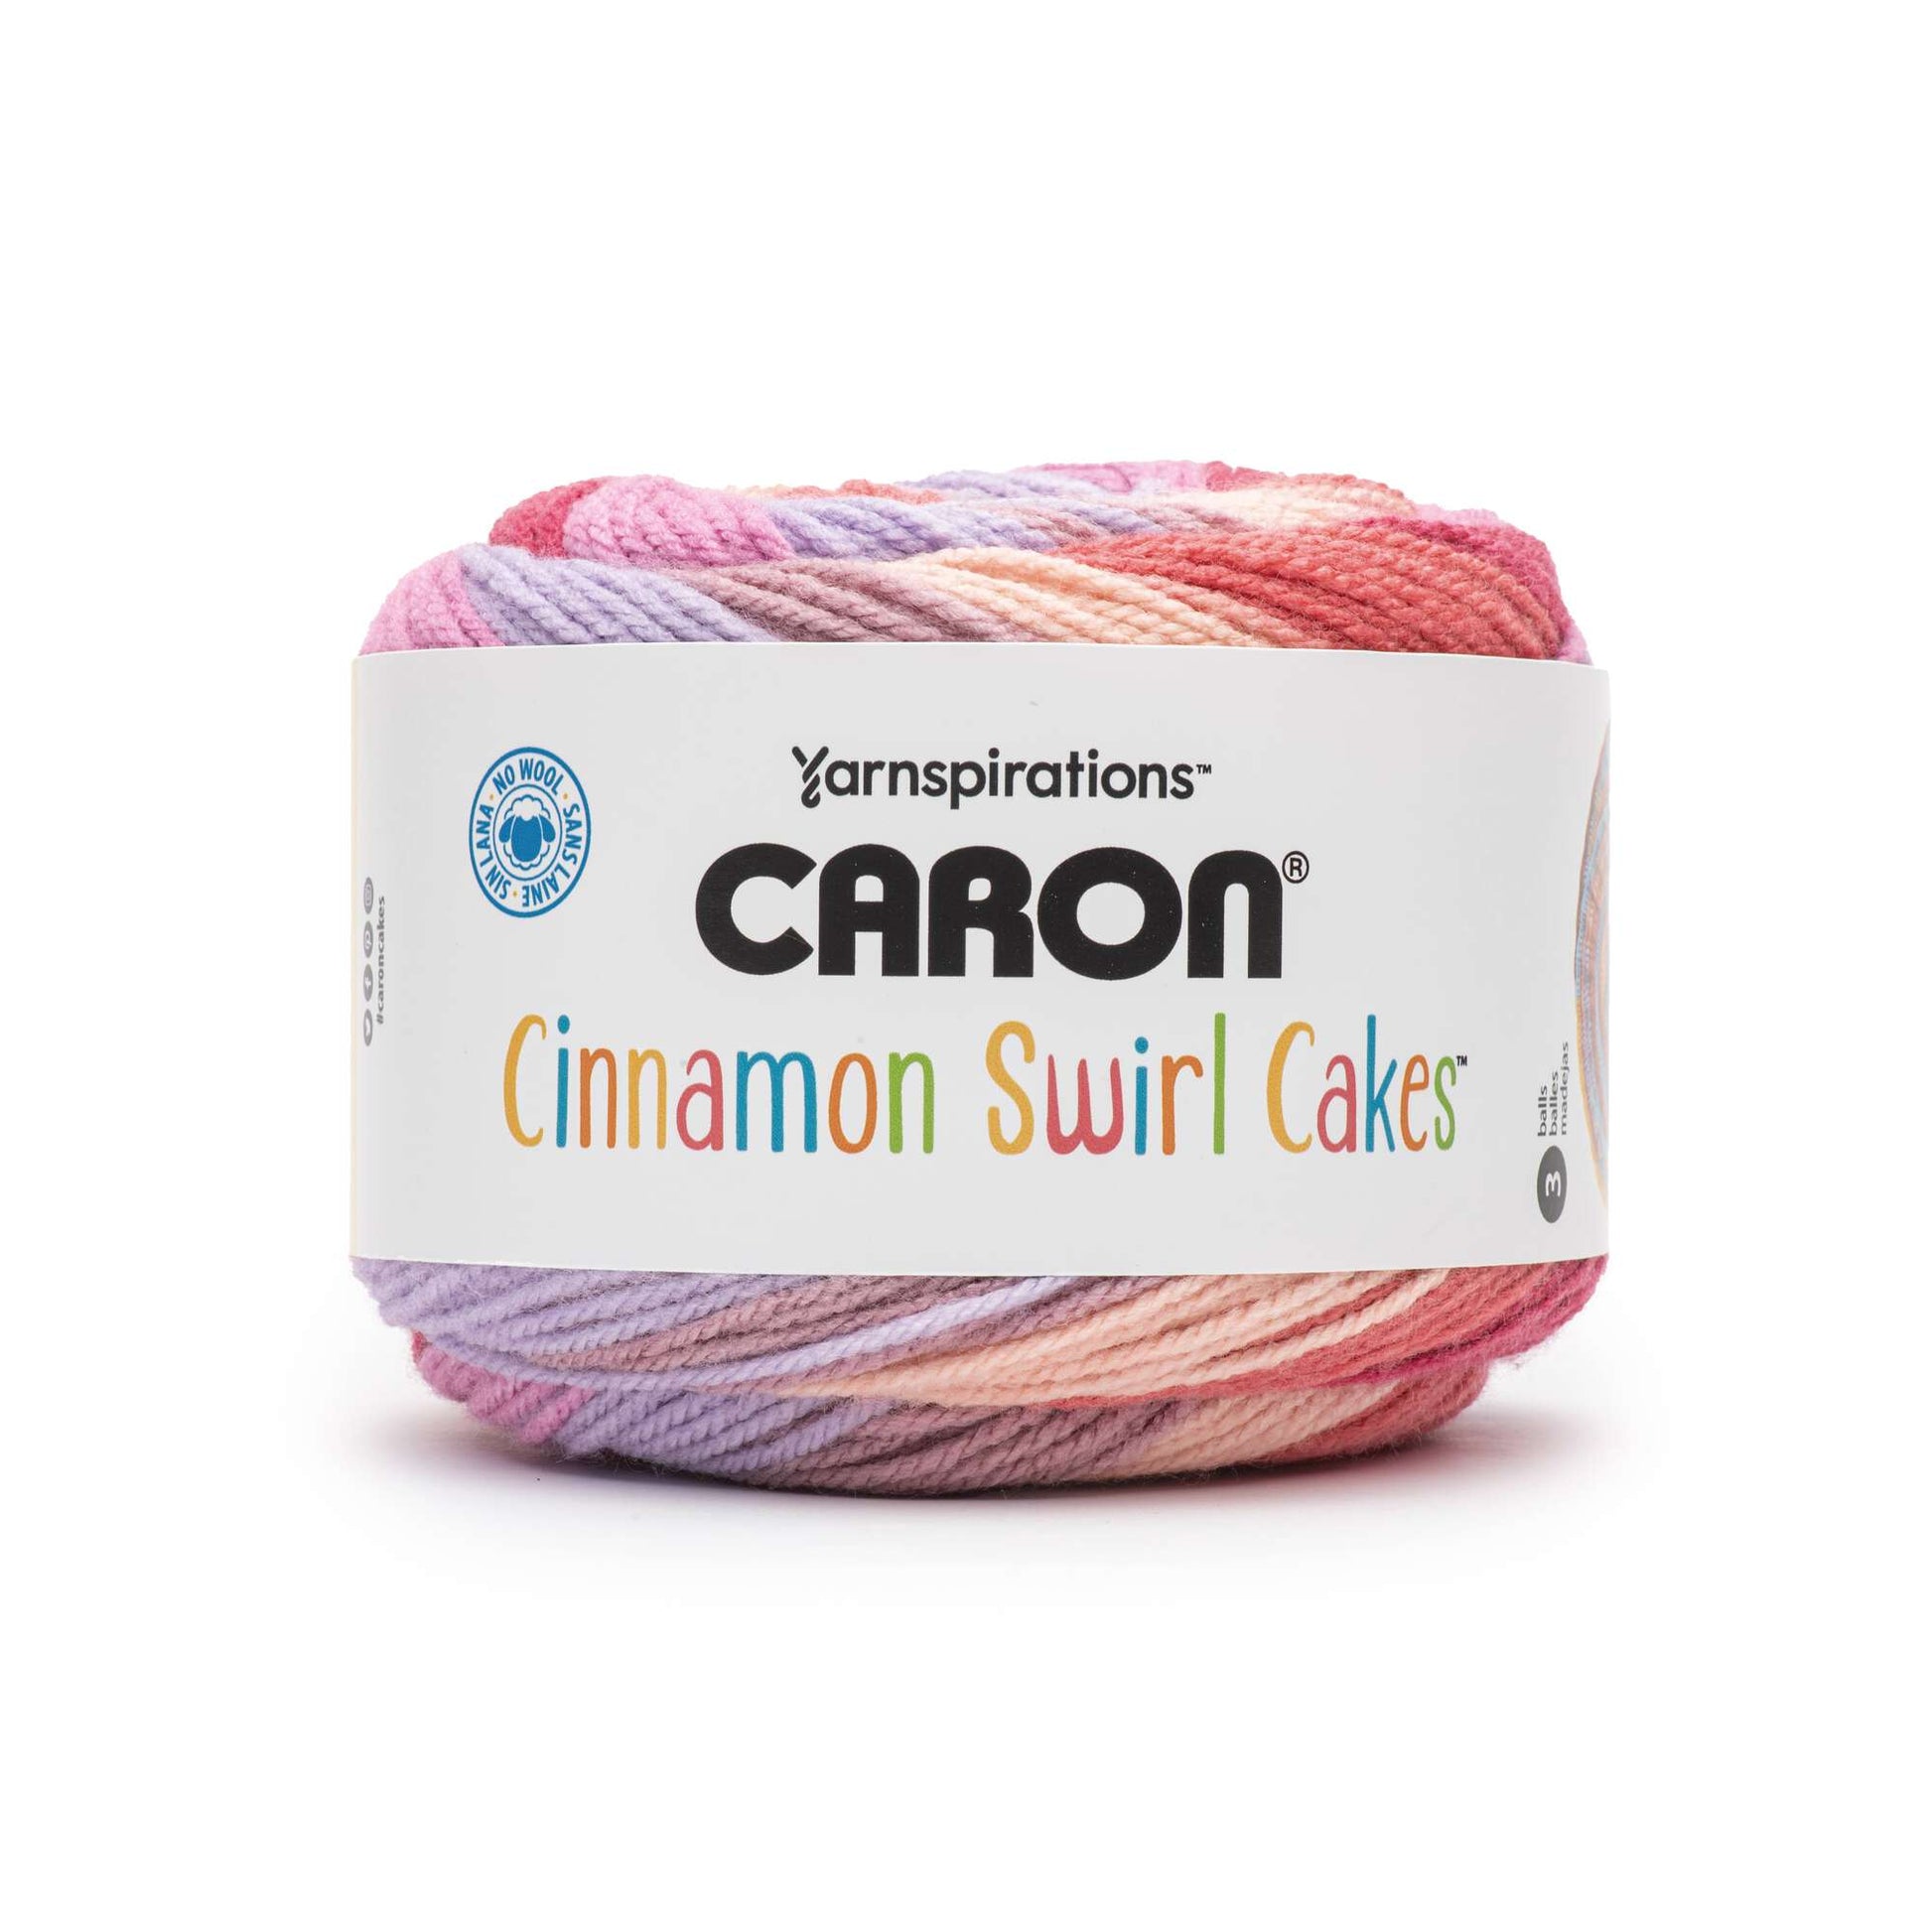 Caron Cinnamon Swirl Cake Review! Crochet AND Knitted Test Swatches 